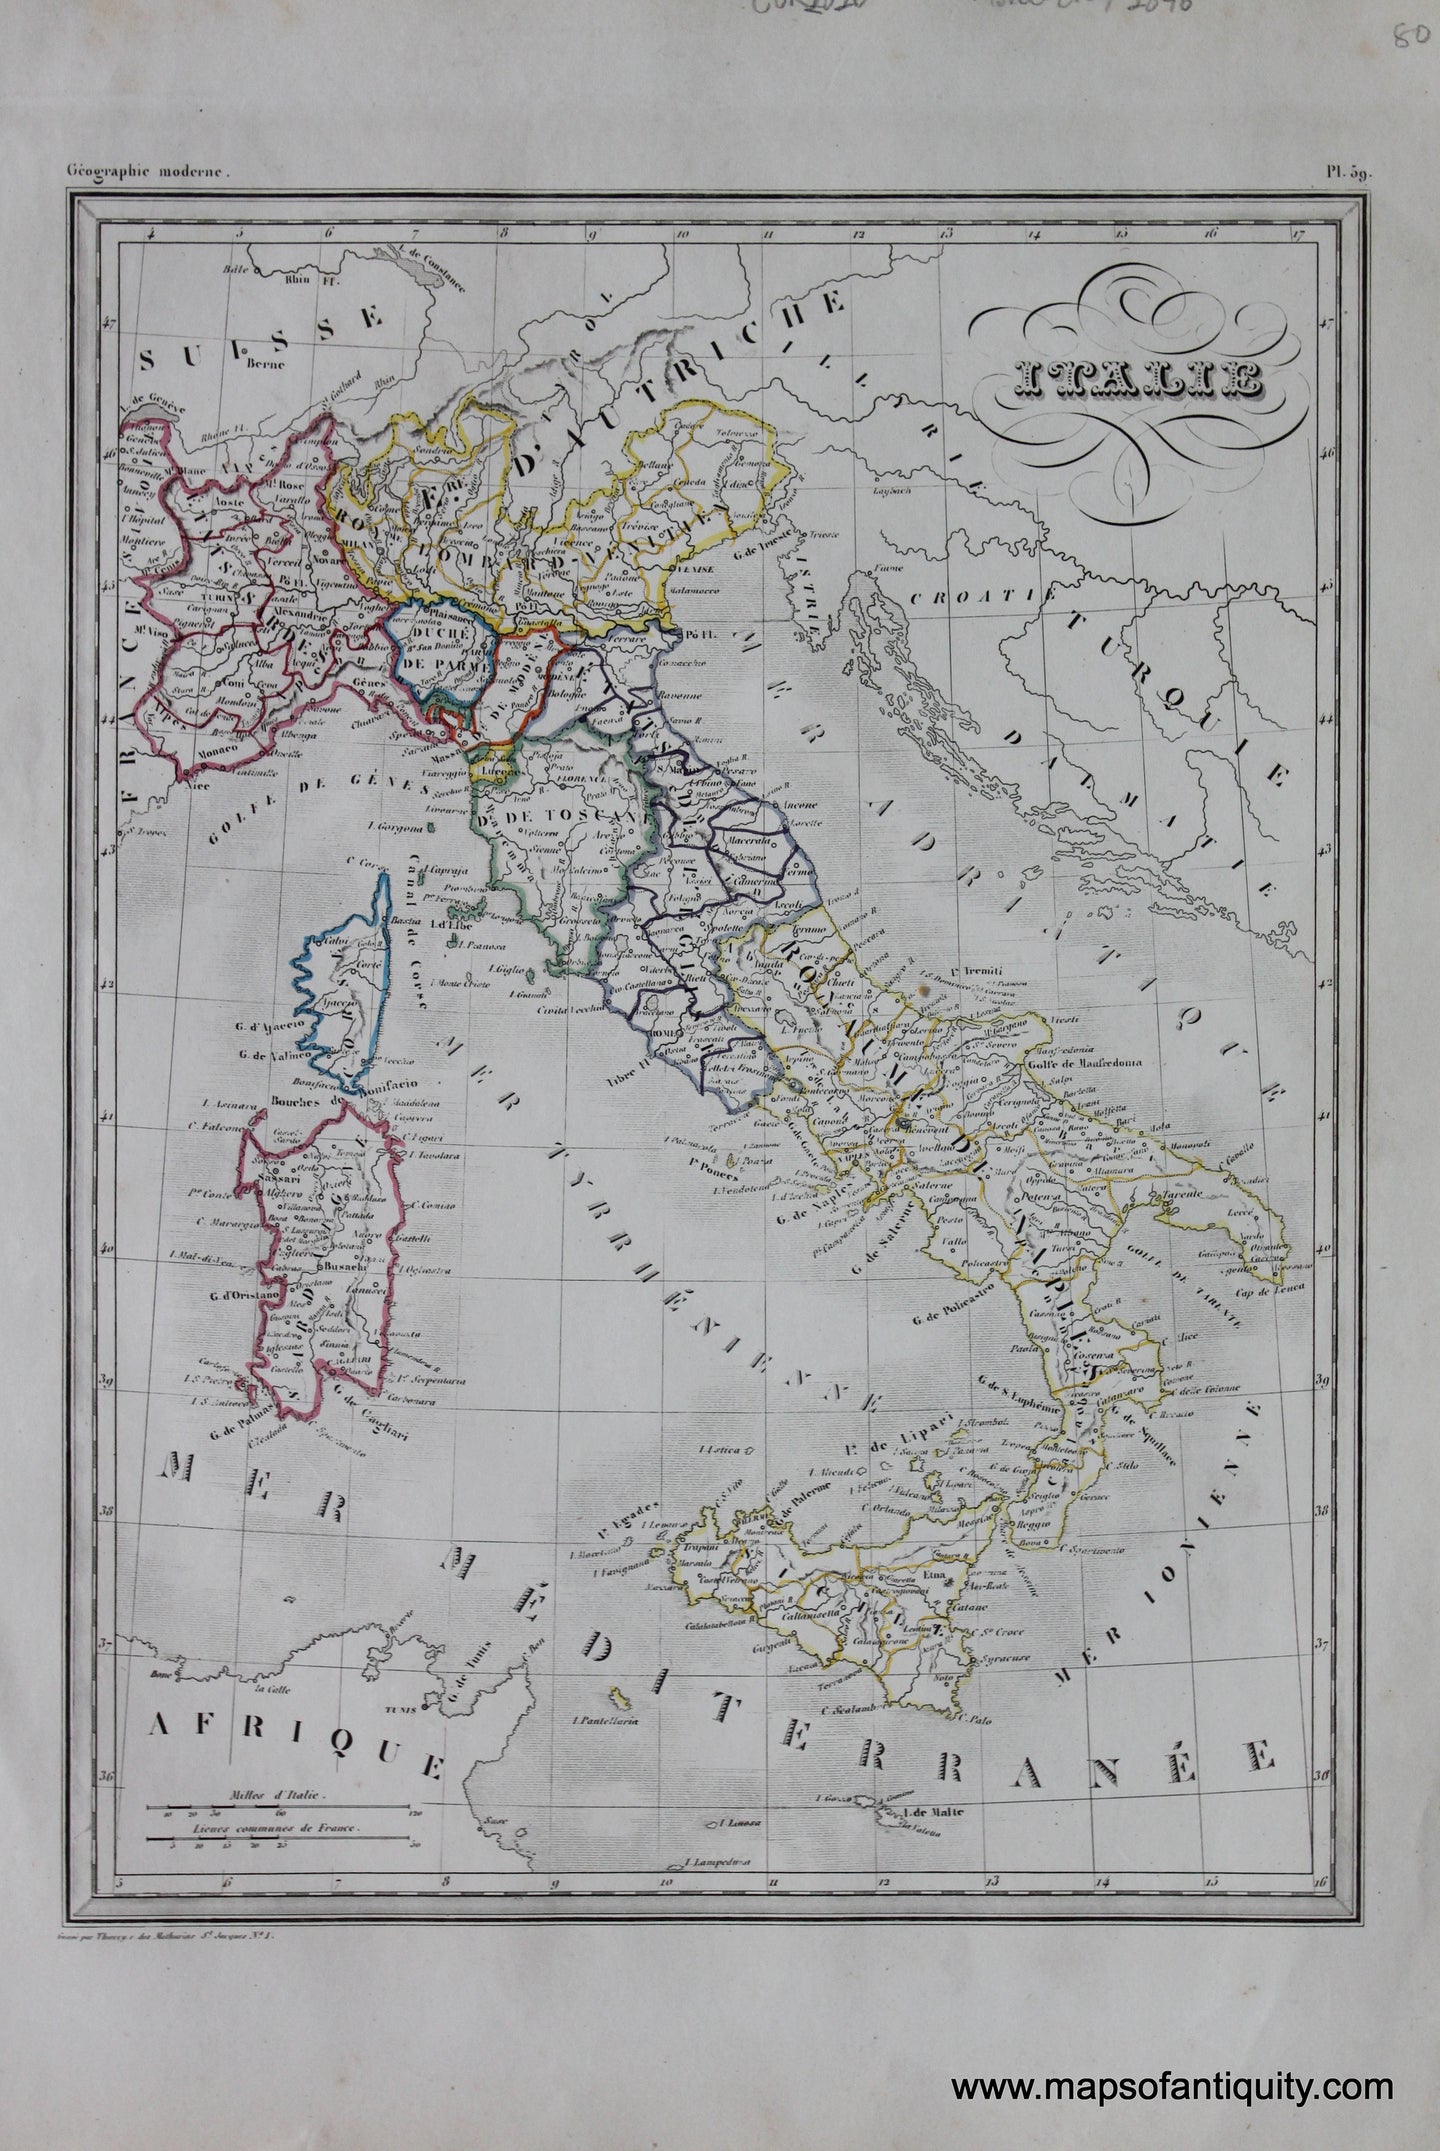 Antique-Hand-Colored-Map-Italie-Europe-Italy-1846-M.-Malte-Brun-Maps-Of-Antiquity